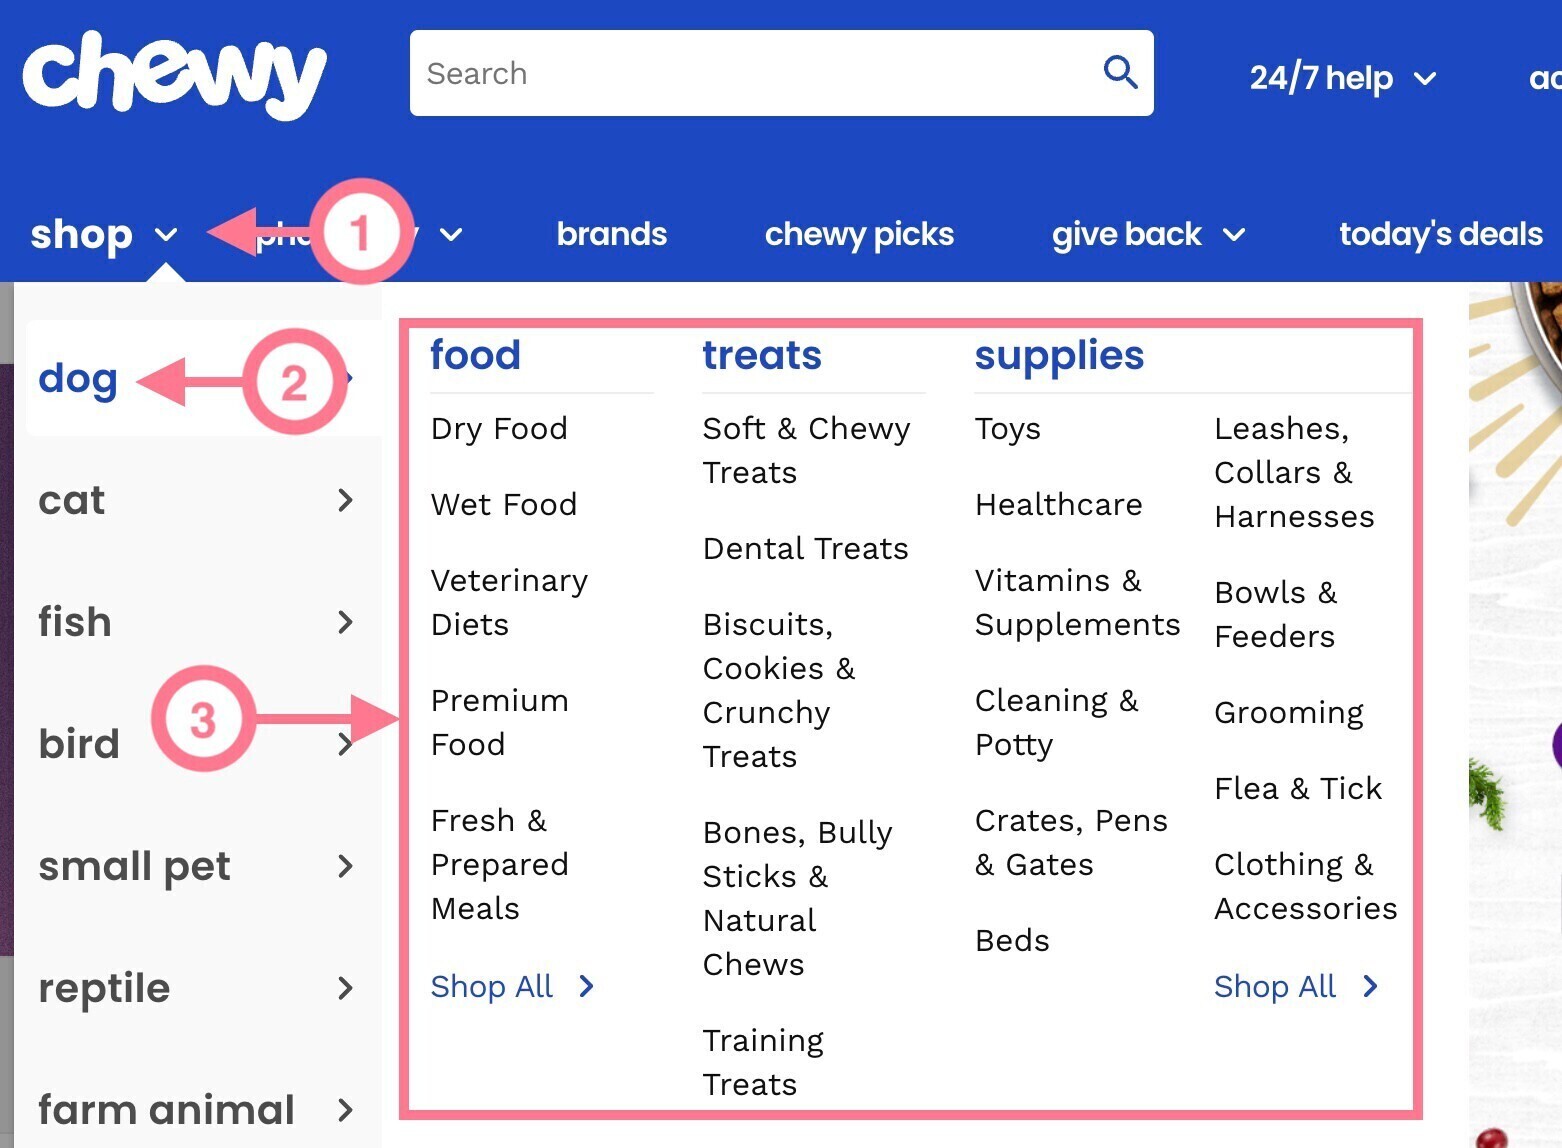 Chewy's shop drop-down menu with different categories and subcategories